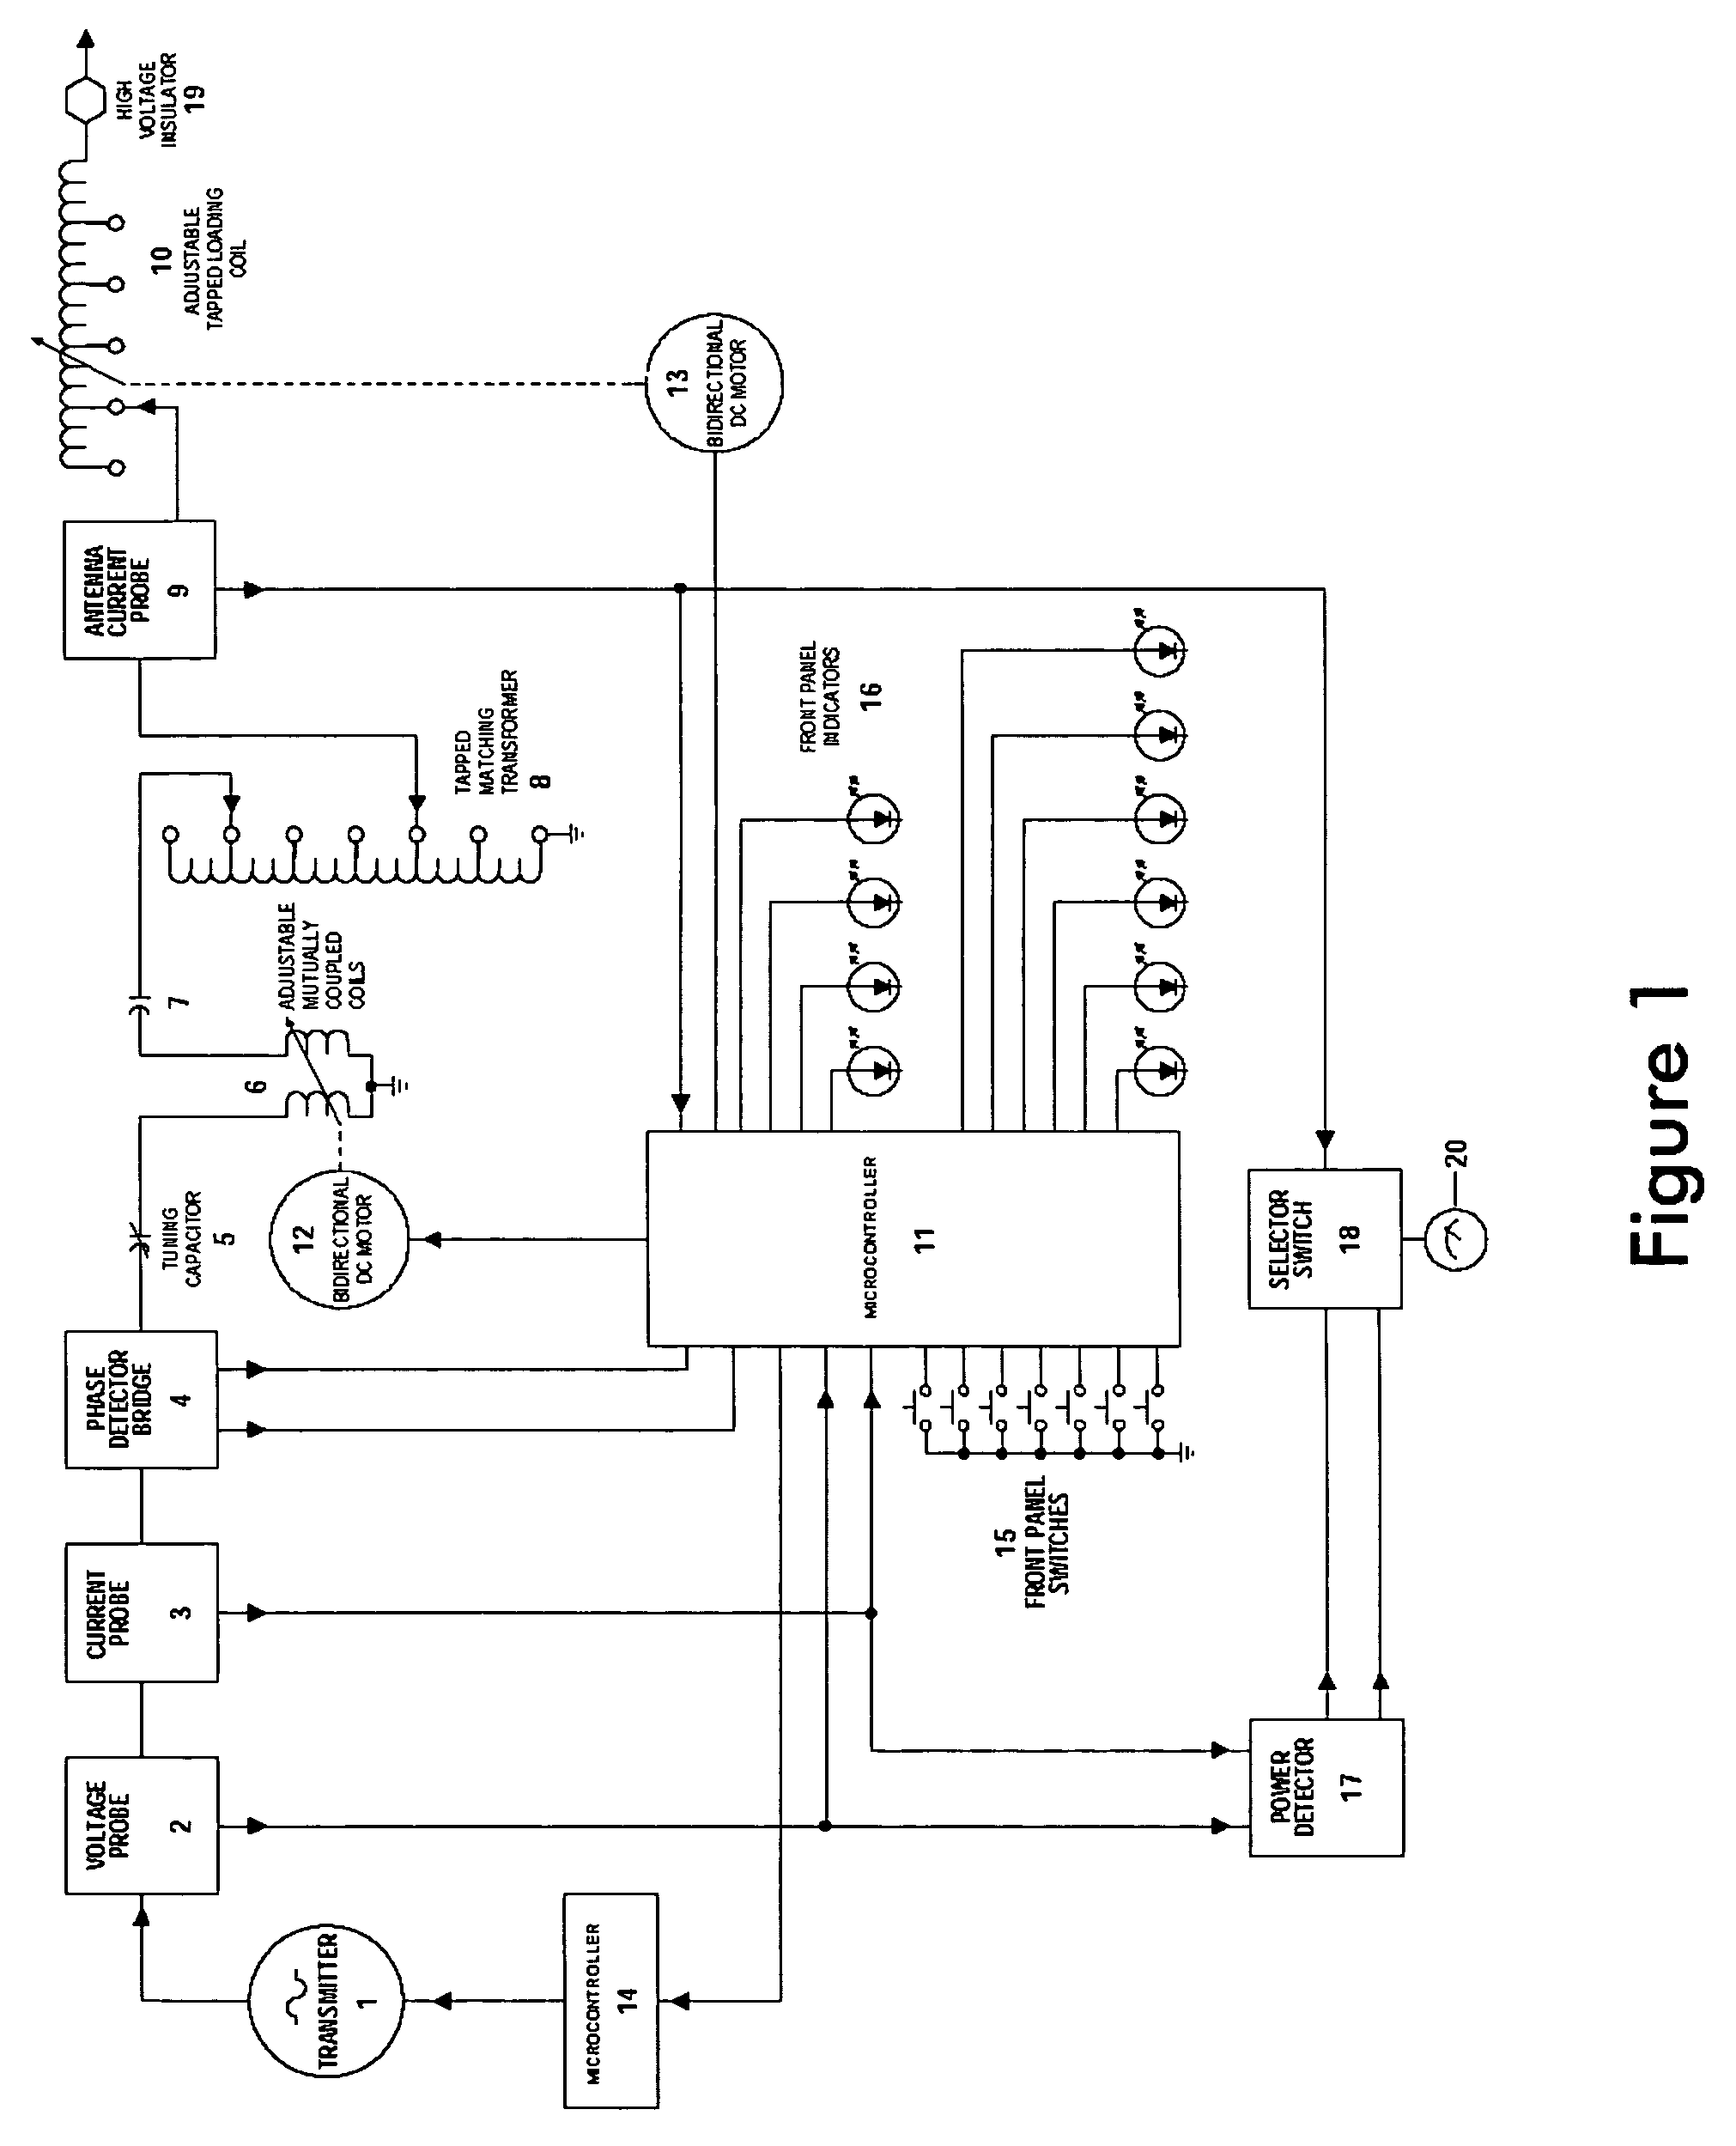 Automatic matching and tuning unit